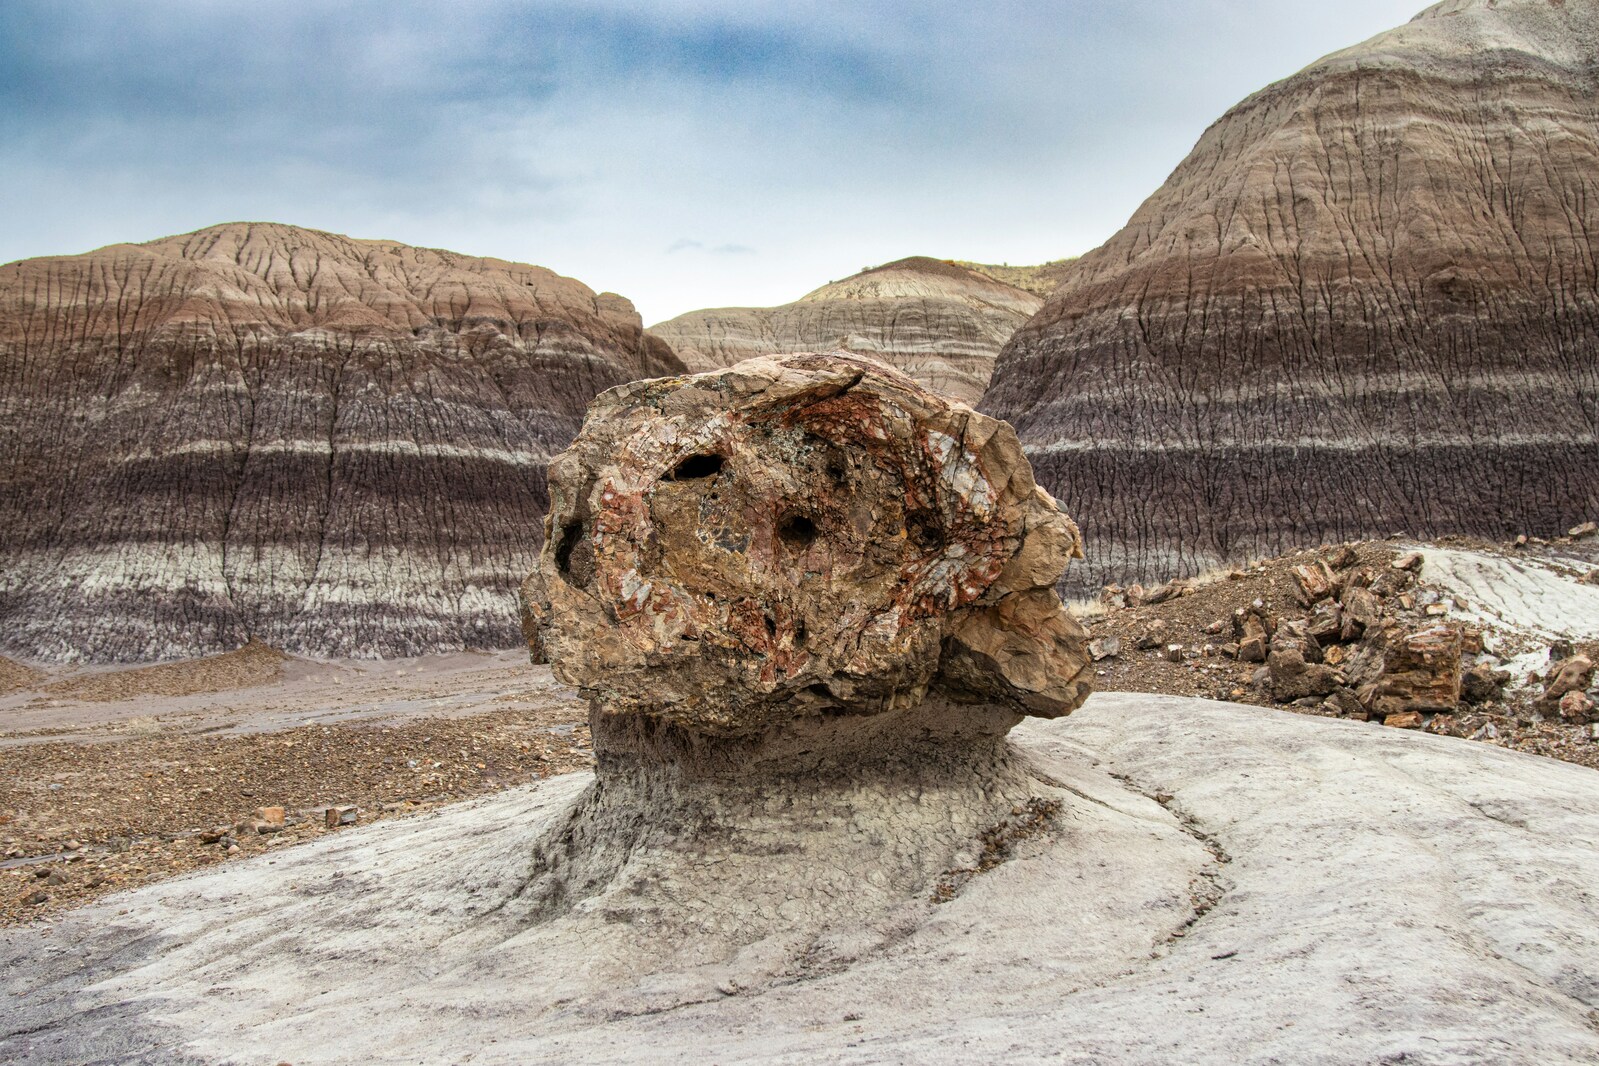 Image of Petrified Forest National Park by Team PhotoHound